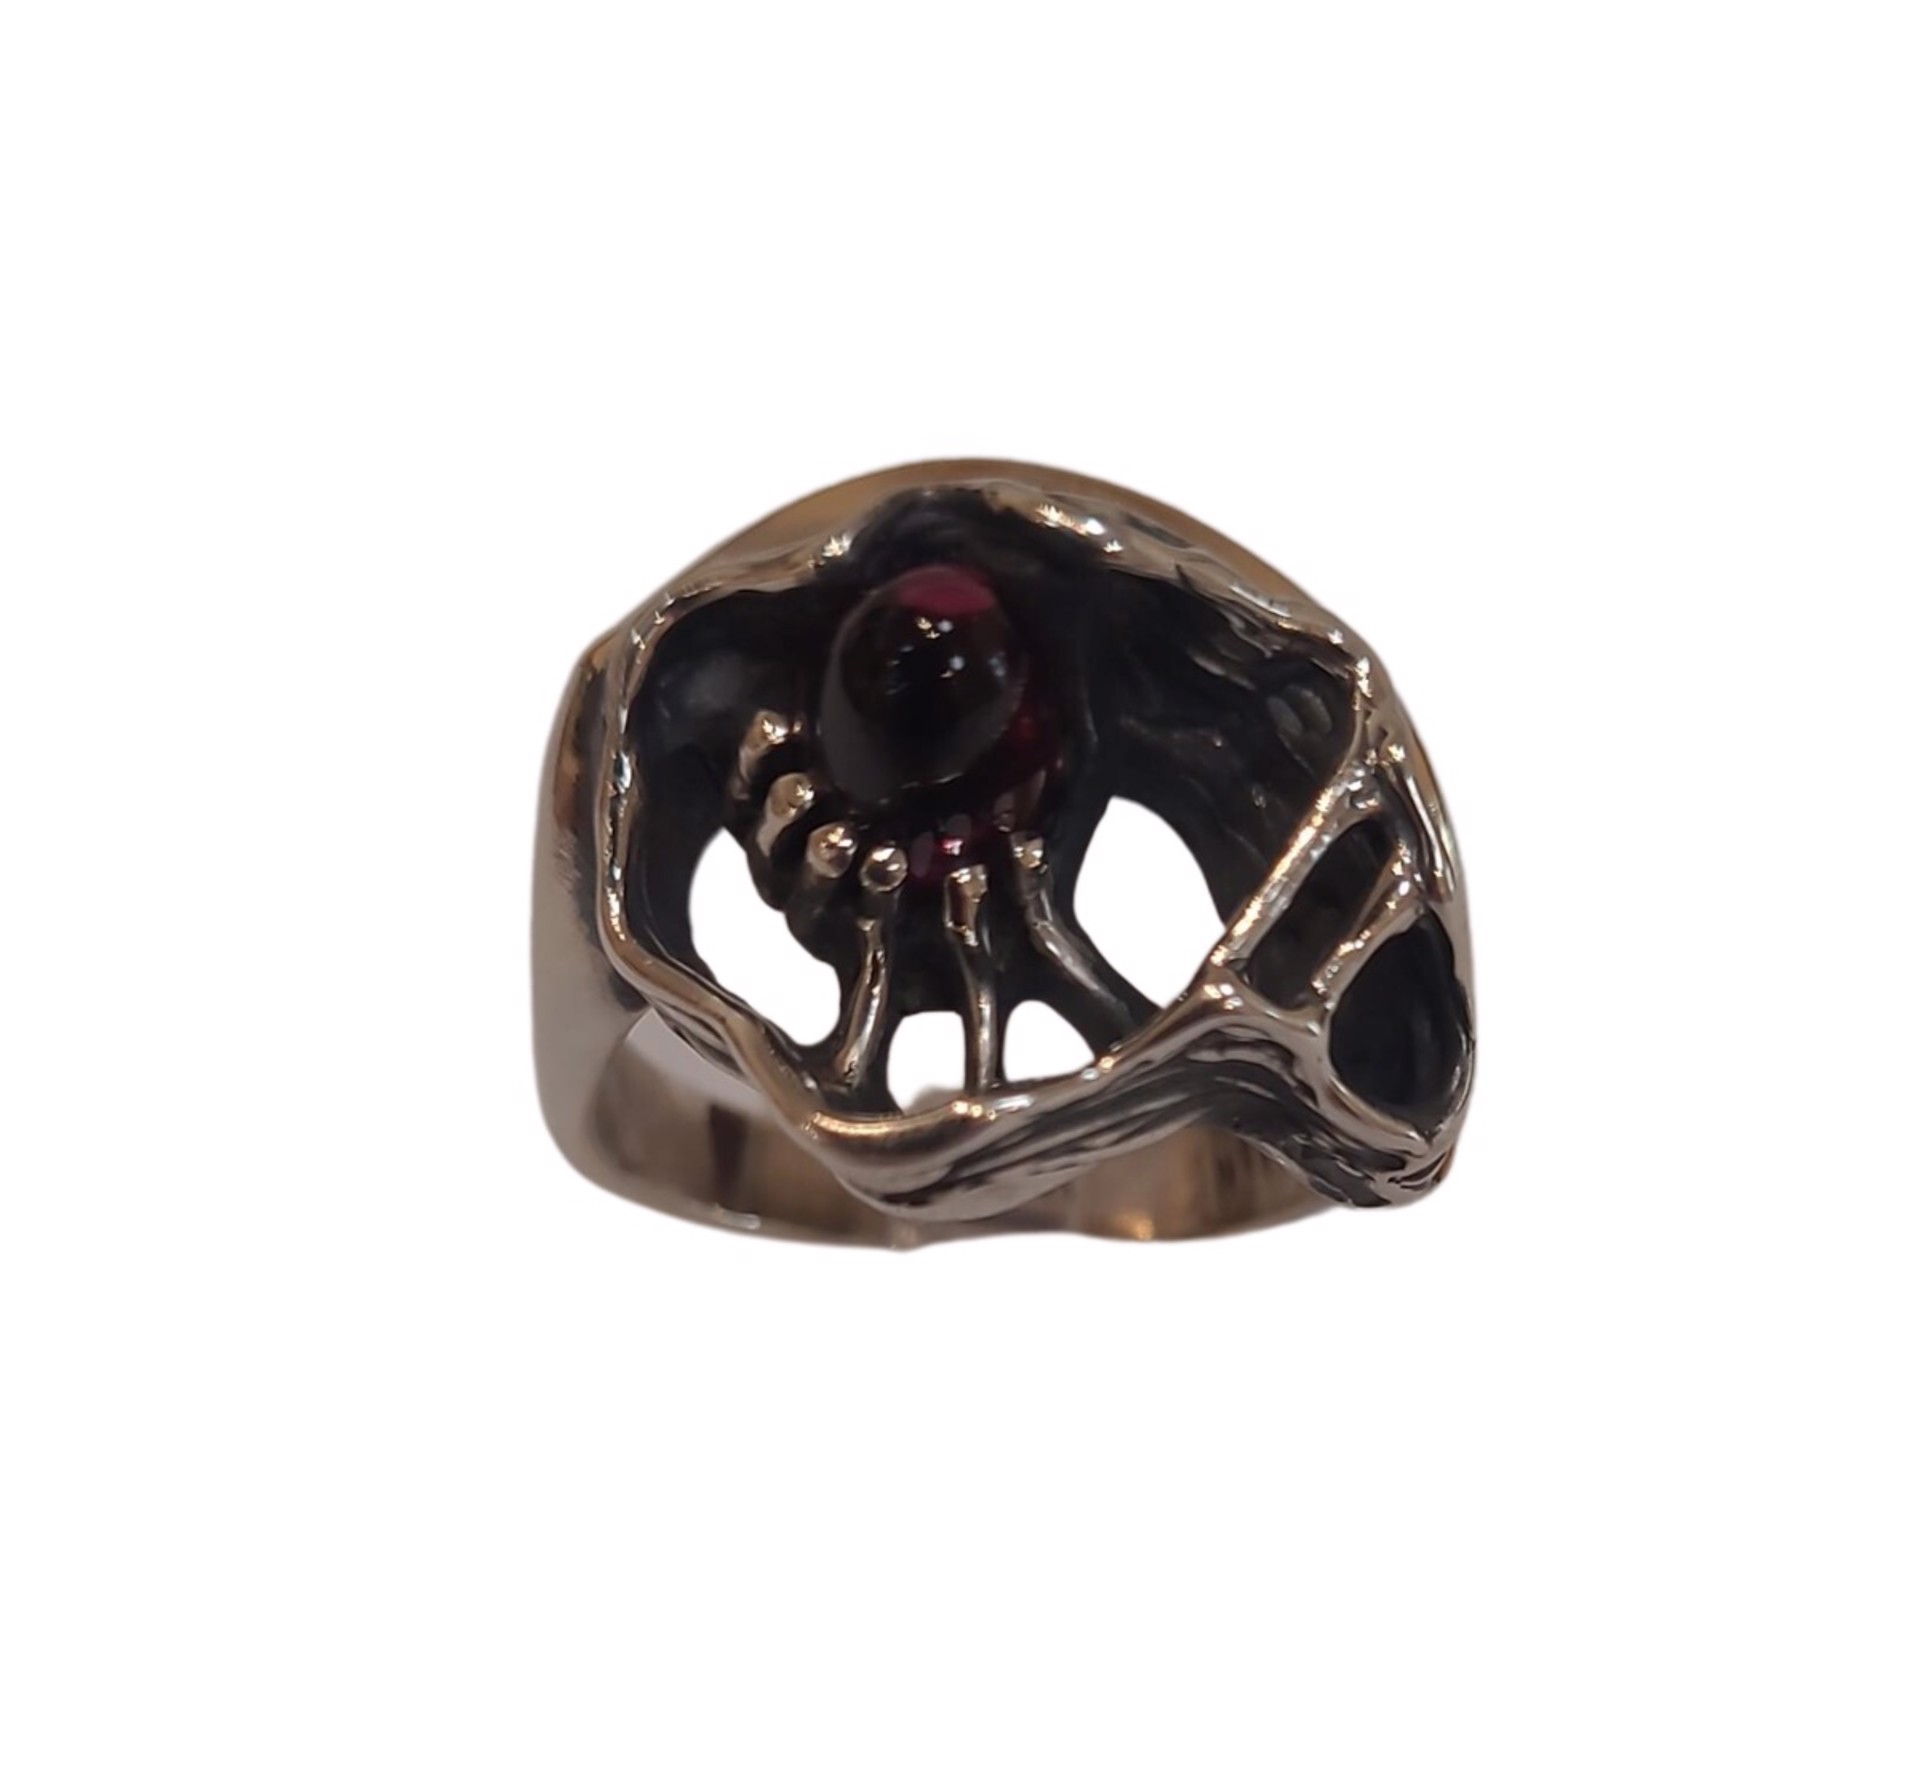 Ring - Sterling Silver and 18k Gold with Garnet Size 7.5  BKN509 by Ken and Barbara Newman